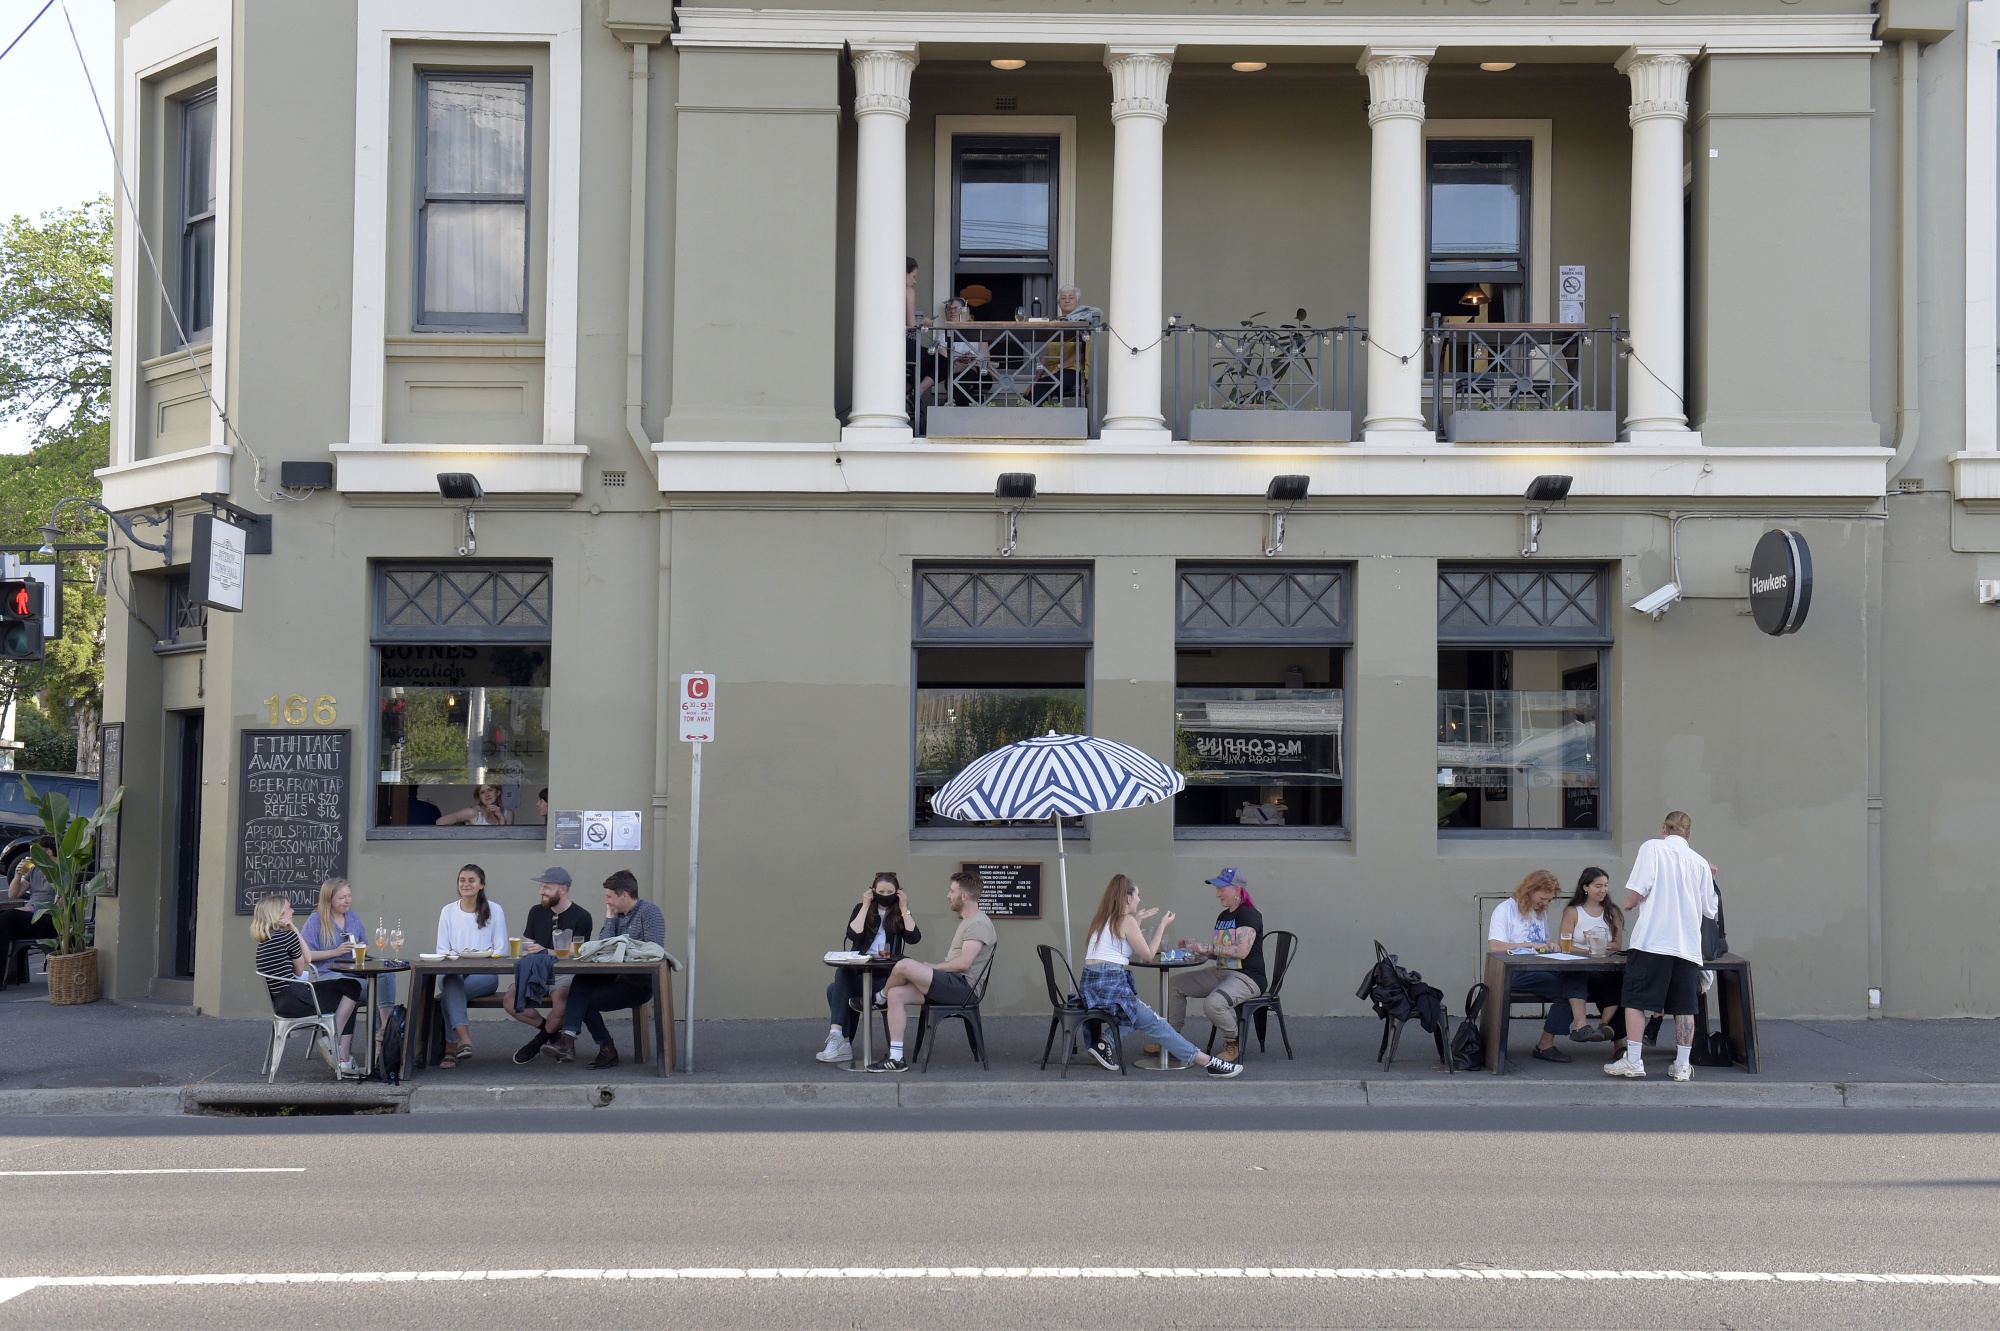 Customers outside of a bar in the Fitzroy district of Melbourne on Oct. 28. The nation’s second-largest city emerged&nbsp;from a three-month lockdown that shuttered business and largely confined residents to their homes.